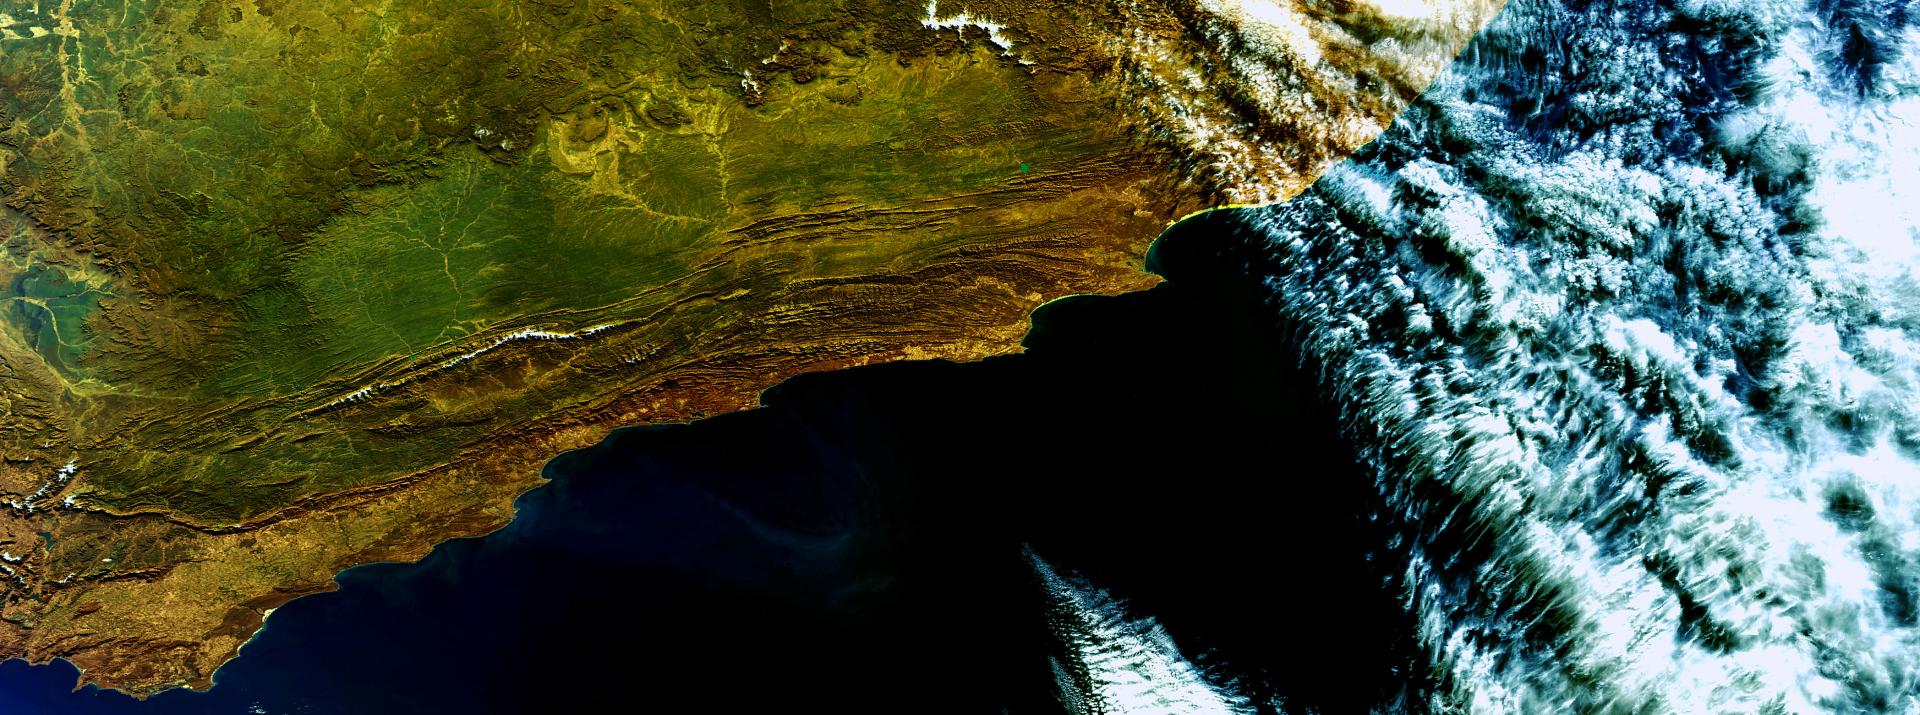 This Envisat image, acquired on 19 June 2010, features the vibrant colours and varied terrain of South Africa. 